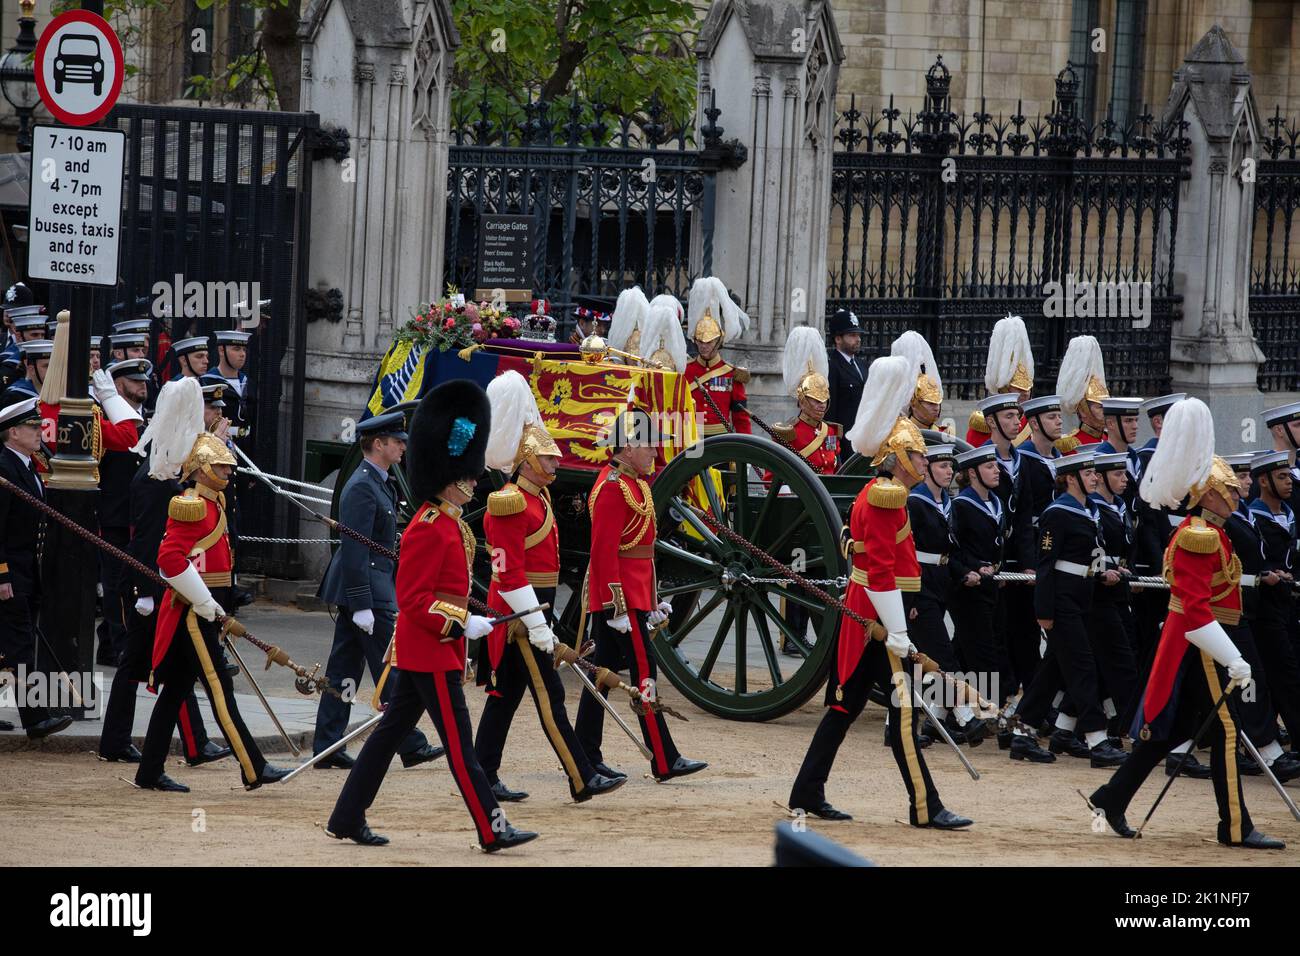 London, England. 19th September, 2022. The coffin of Queen Elizabeth II leaves the Palace of Westminster for the Monarch's State Funera at Westminster Abbey. The long reigning monarch had died on September 8th. Credit: Kiki Streitberger / Alamy Live News Stock Photo